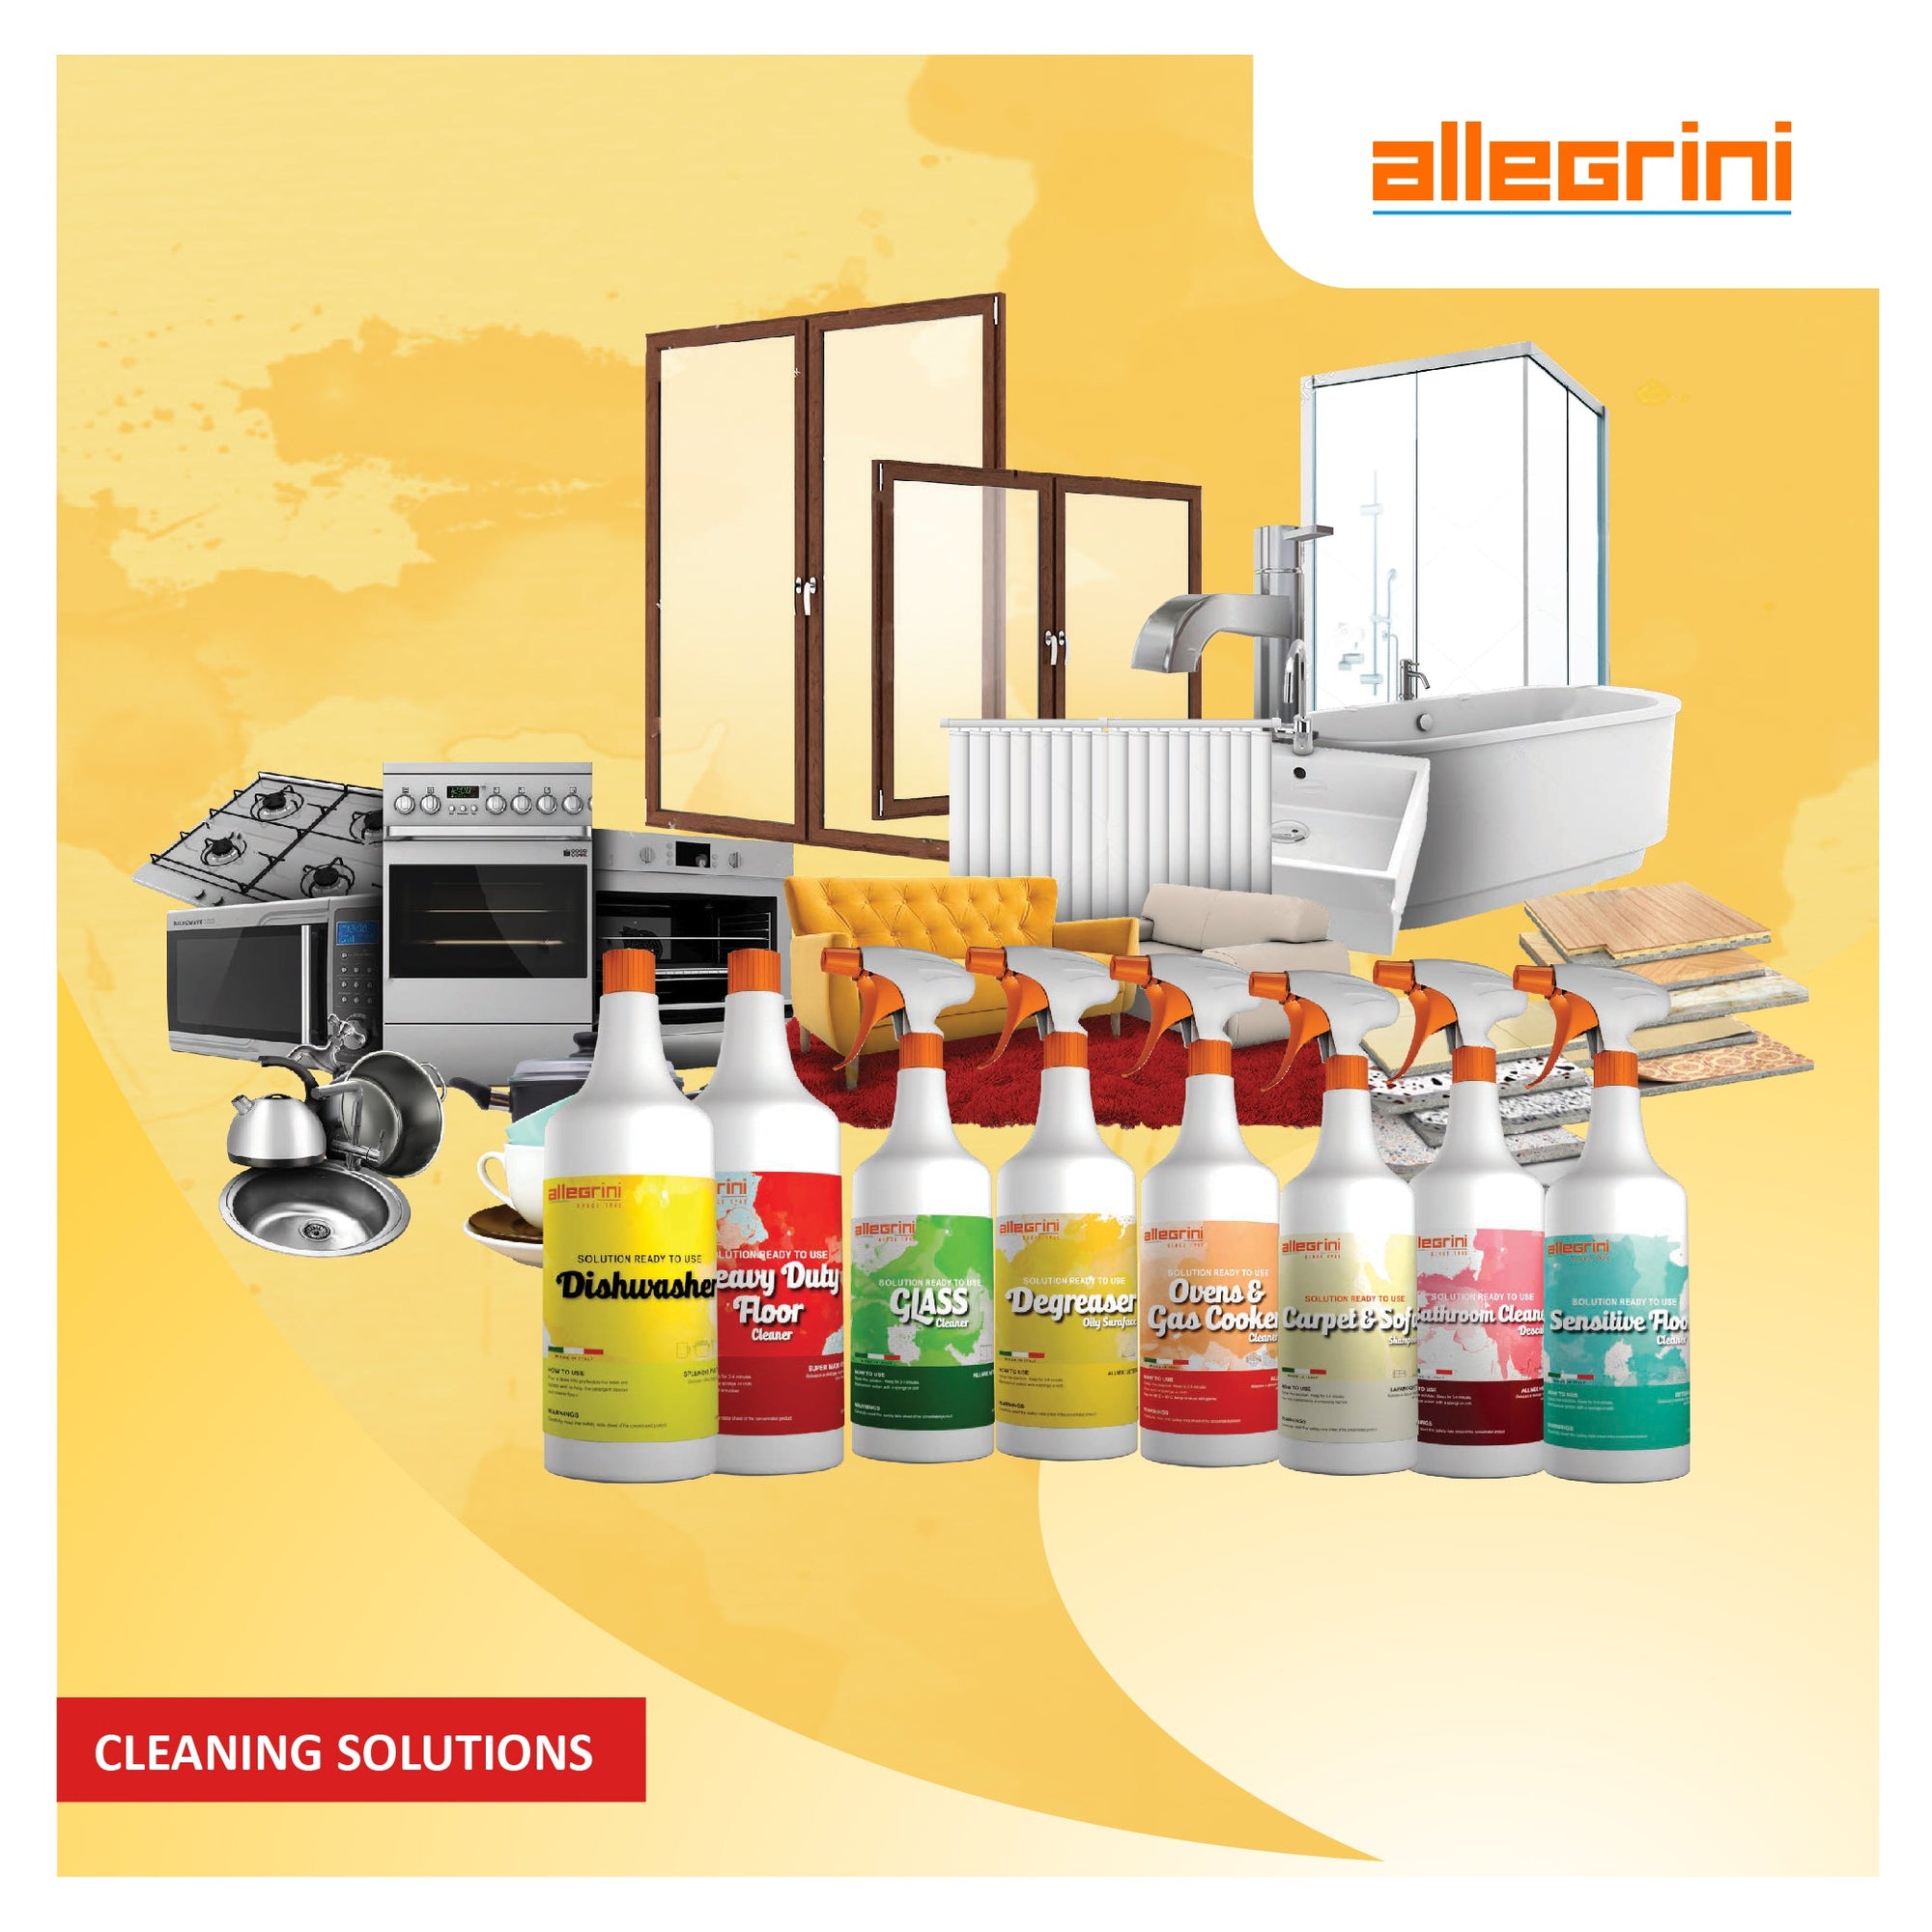 Allegrini Cleaning Solutions - Clean with Confidence